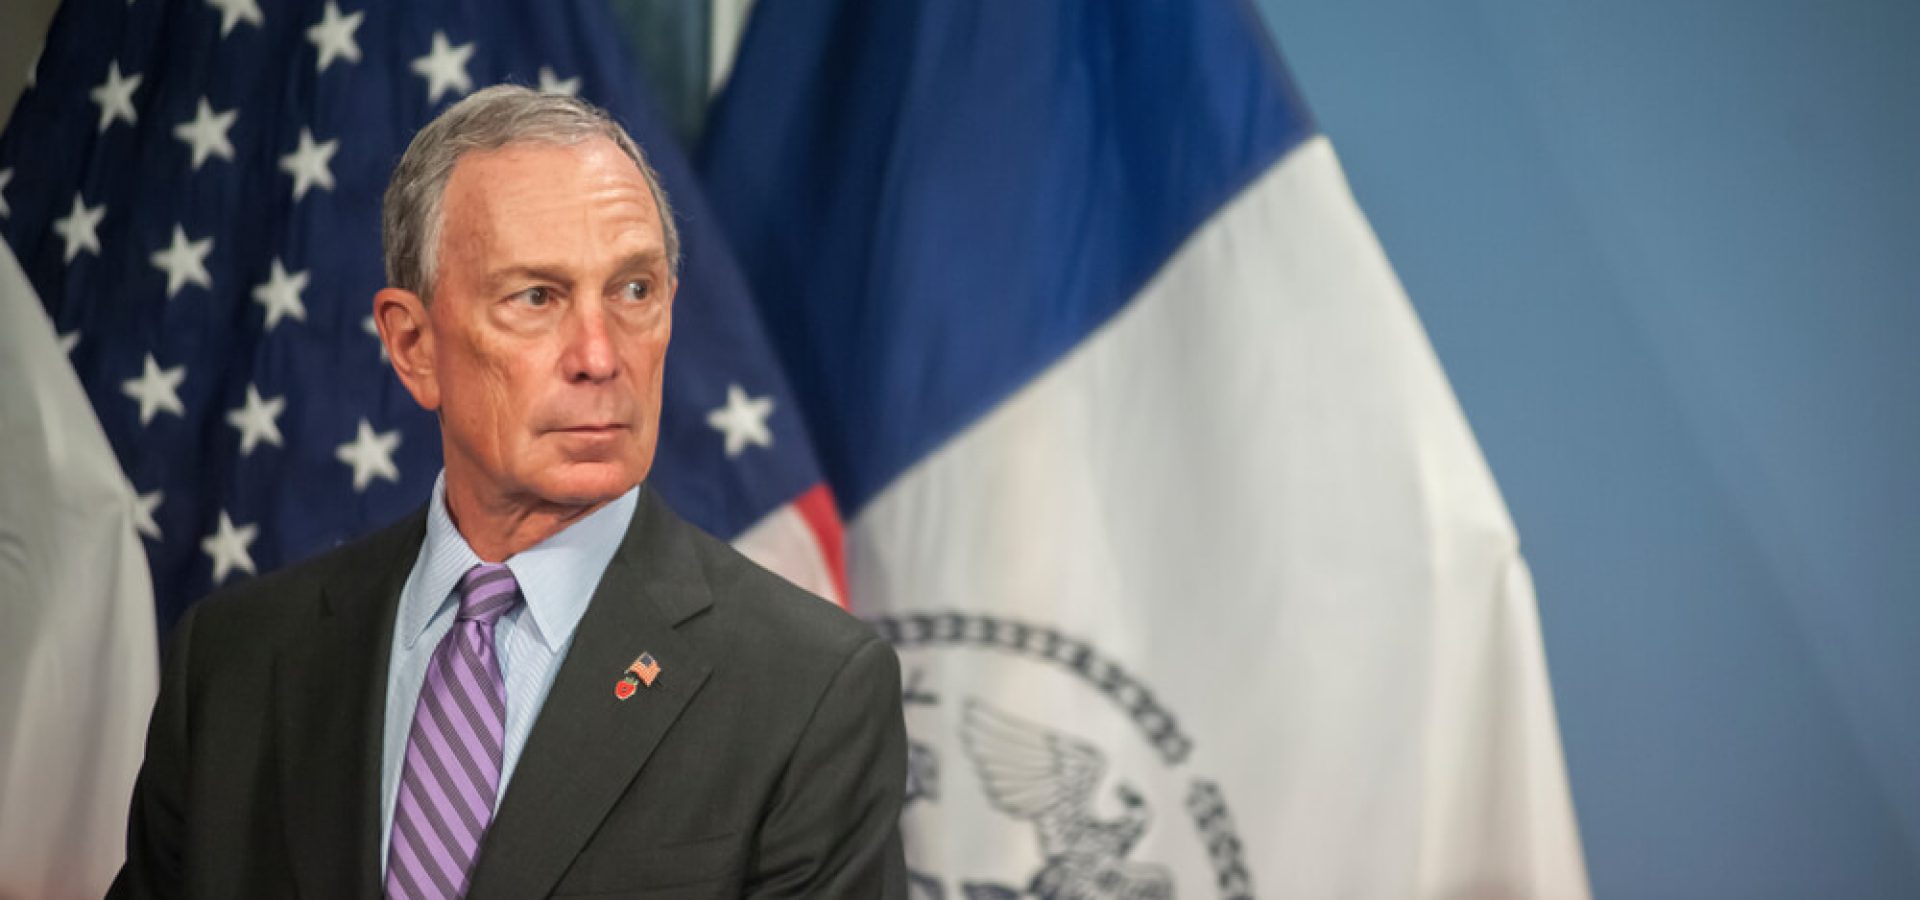 Mike Bloomberg photo with flags background.